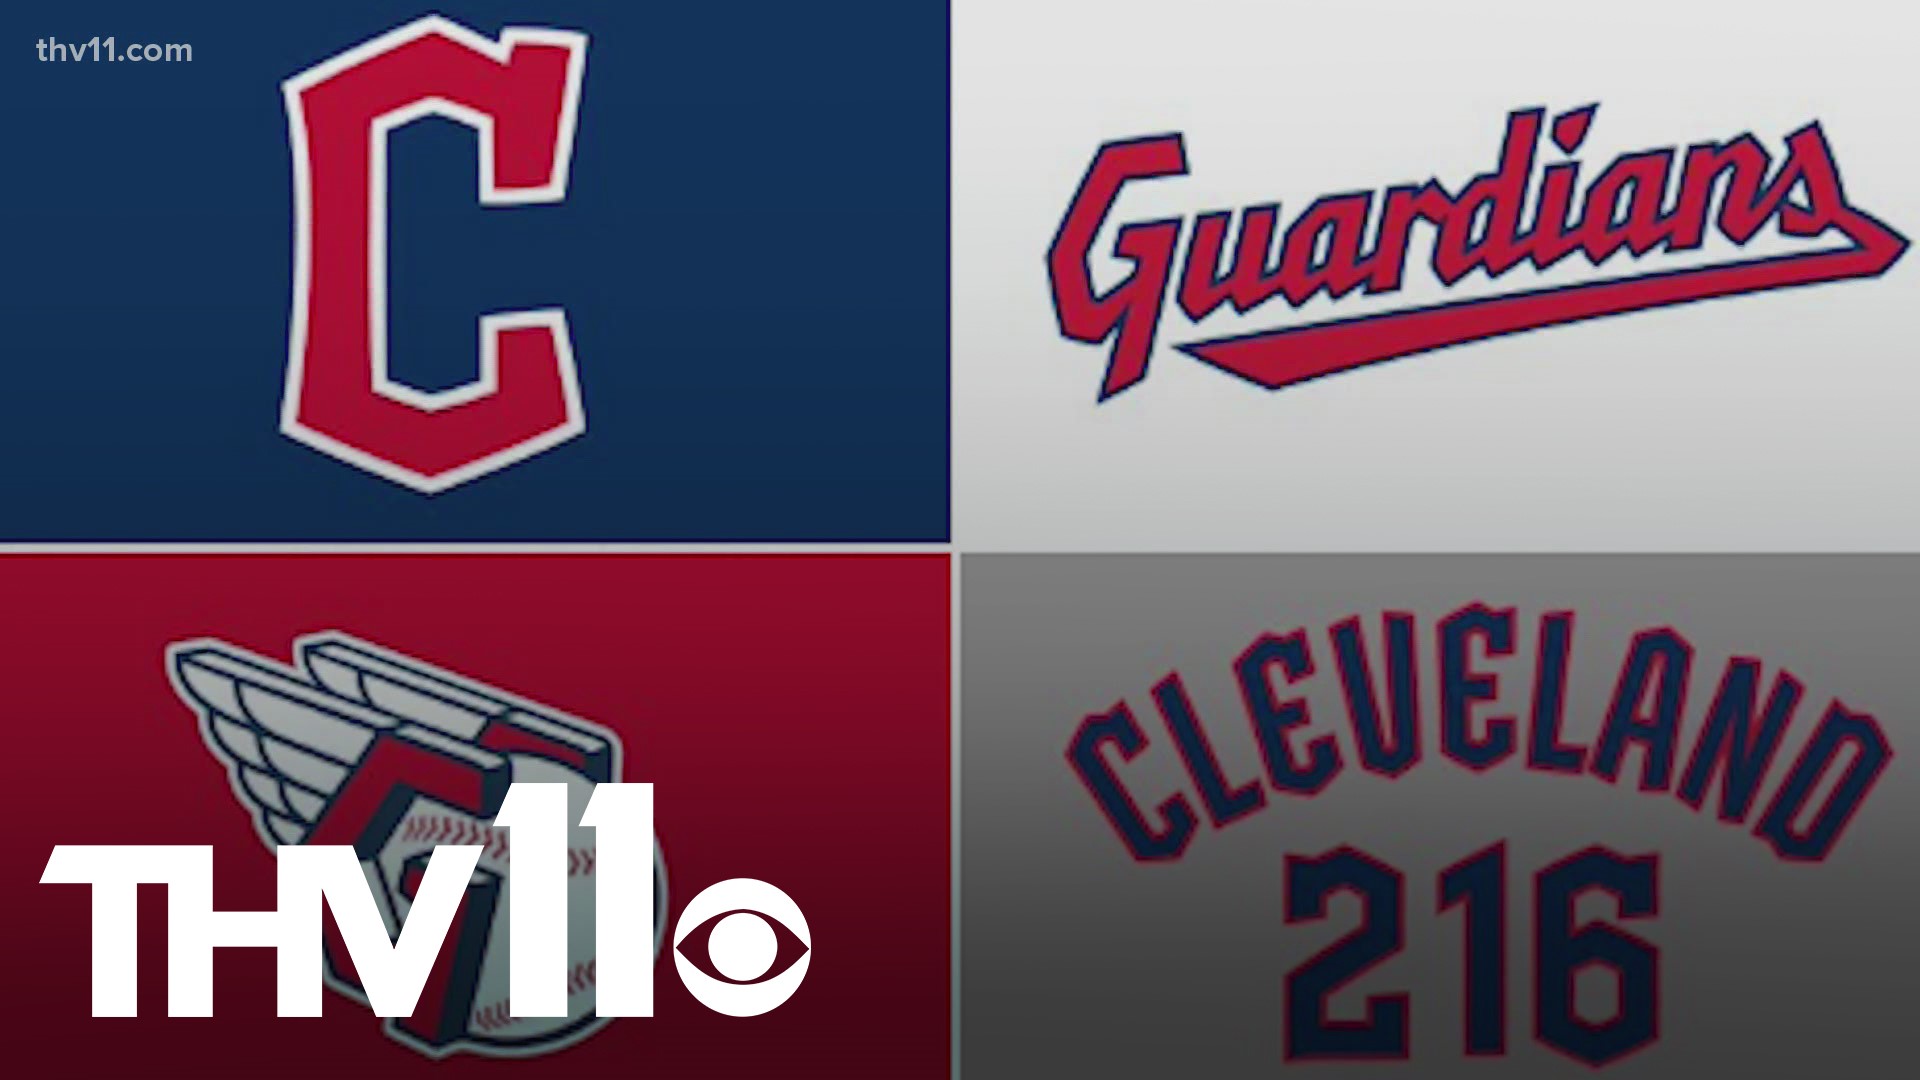 MLB's Cleveland Indians' New Name is the Cleveland Guardians